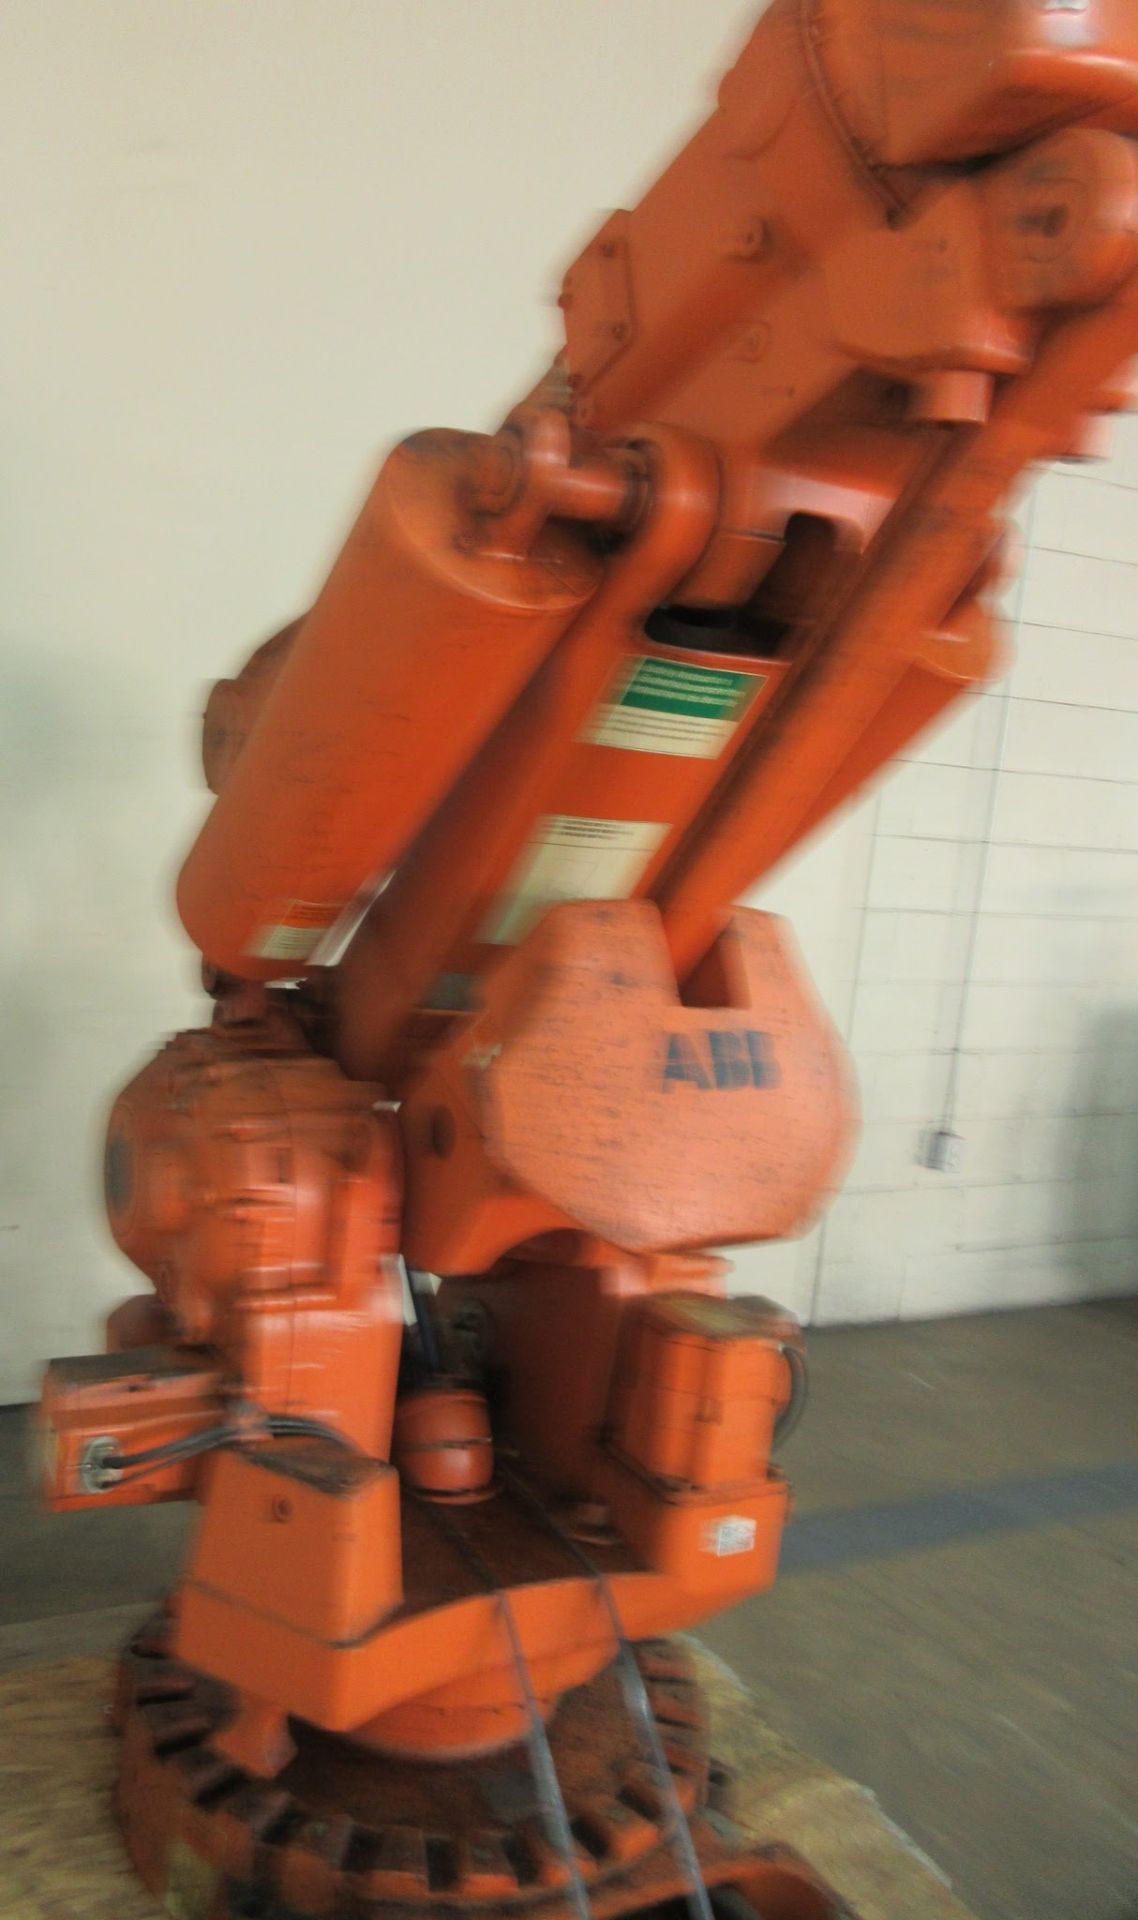 ABB IRB6400R LOADING ROBOT W/ IRB2400 M2000 ROBOT CONTROLLER, TEACH PENDANT AND CABLES (LOCATED IN - Image 2 of 4